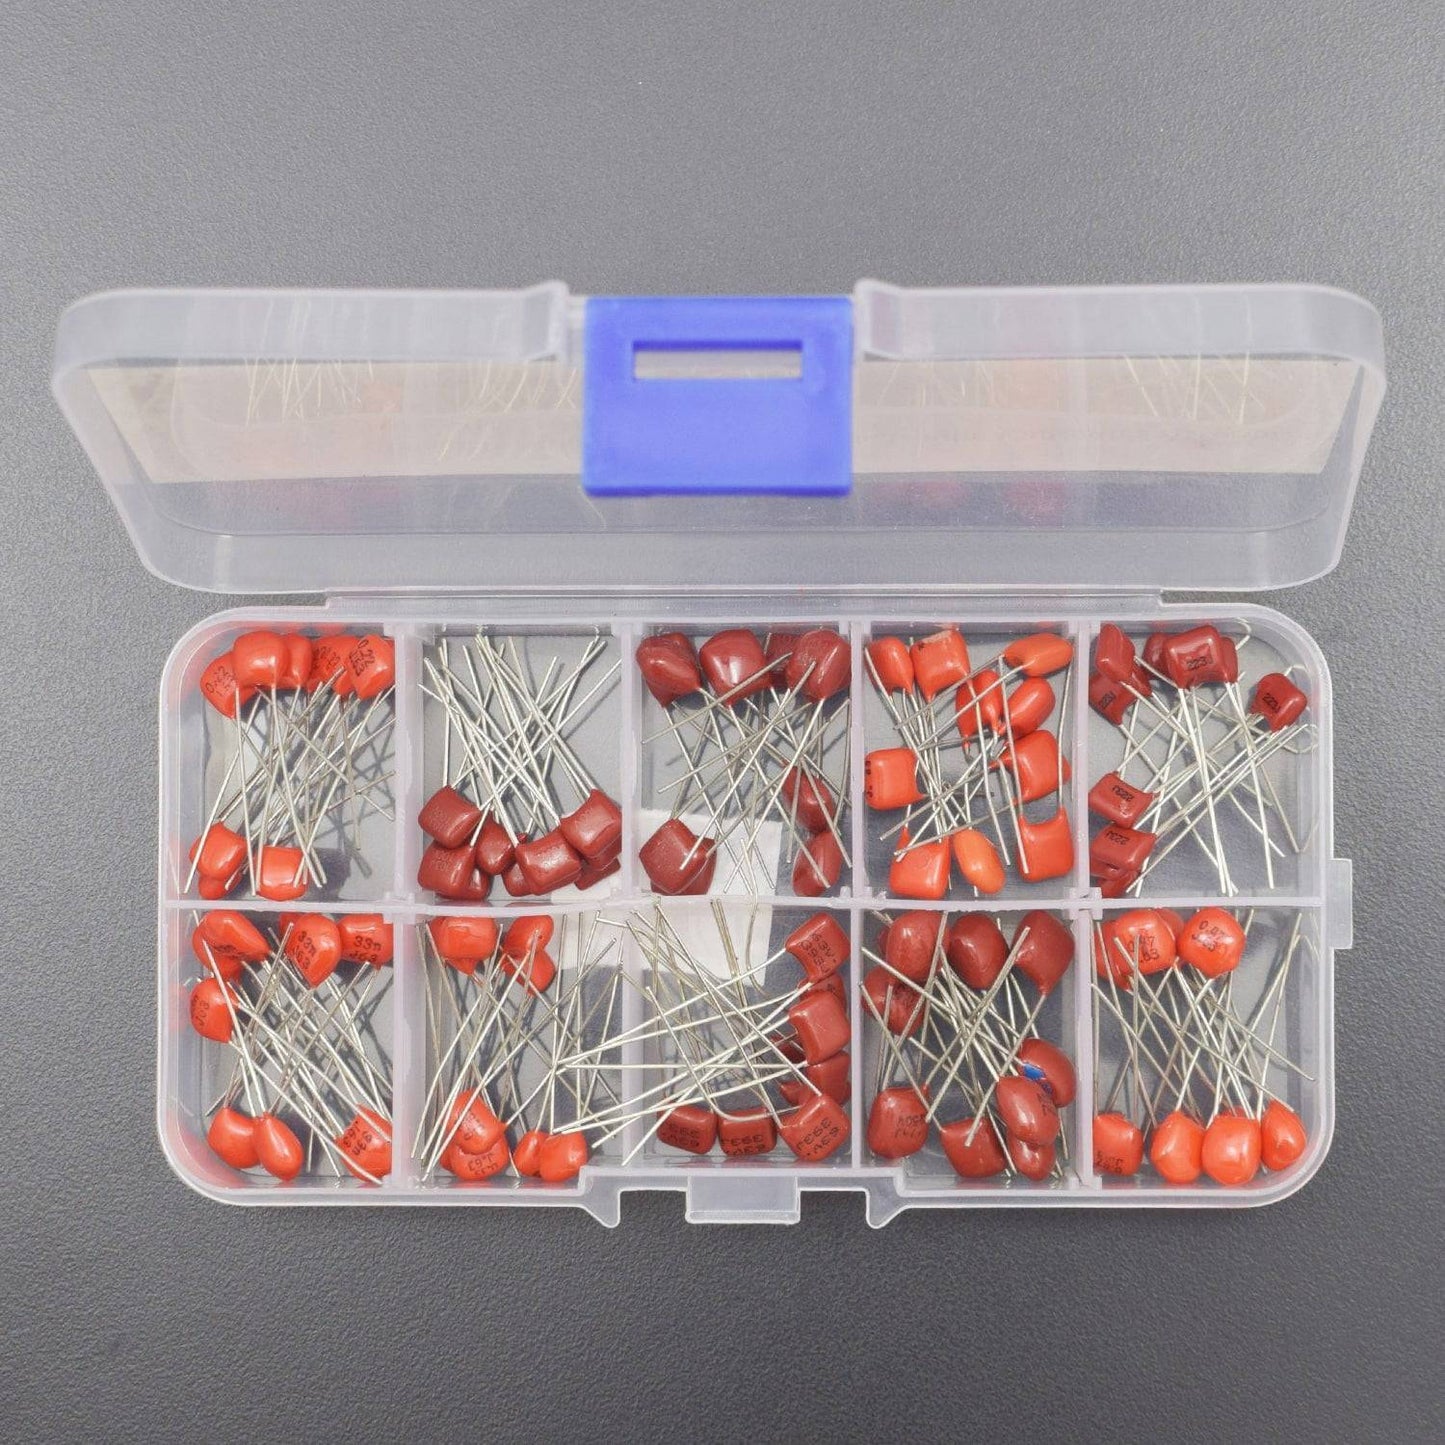 100 Pieces 10 Values CBB Polypropylene Capacitor Assortment Kit 10nF-470nF Metalized Film Capacitor with Storage Box - RS1849 - REES52